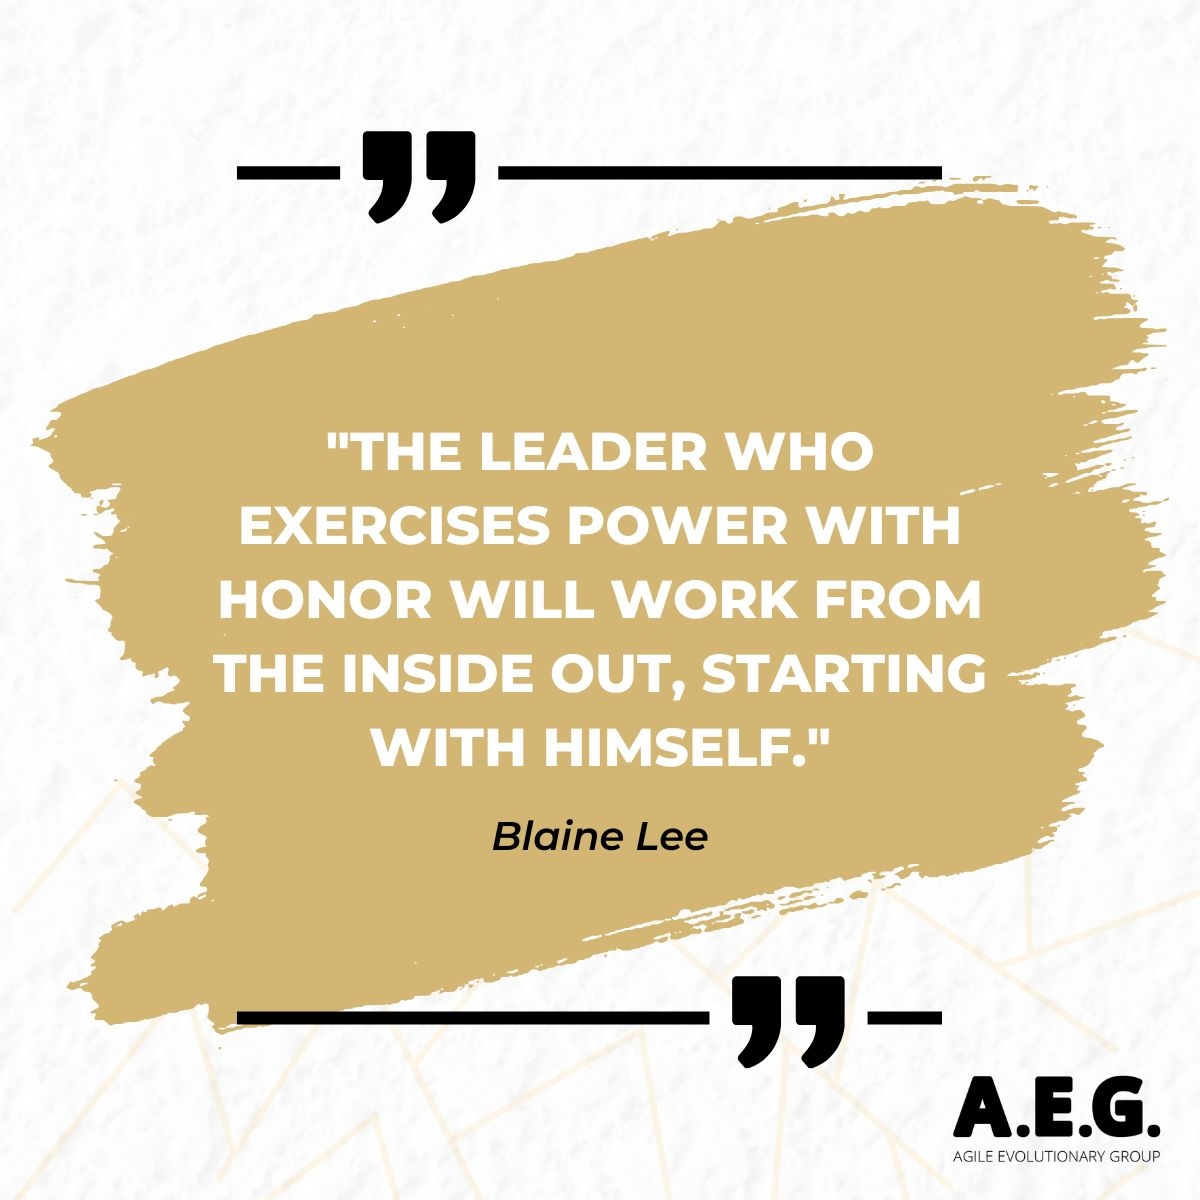 A good education leader understands the importance of self-improvement. They seek out new knowledge and skills, collaborate with others, and reflect on their practice to become the best version of themselves. #ChangeTheWorld #EquityForAll